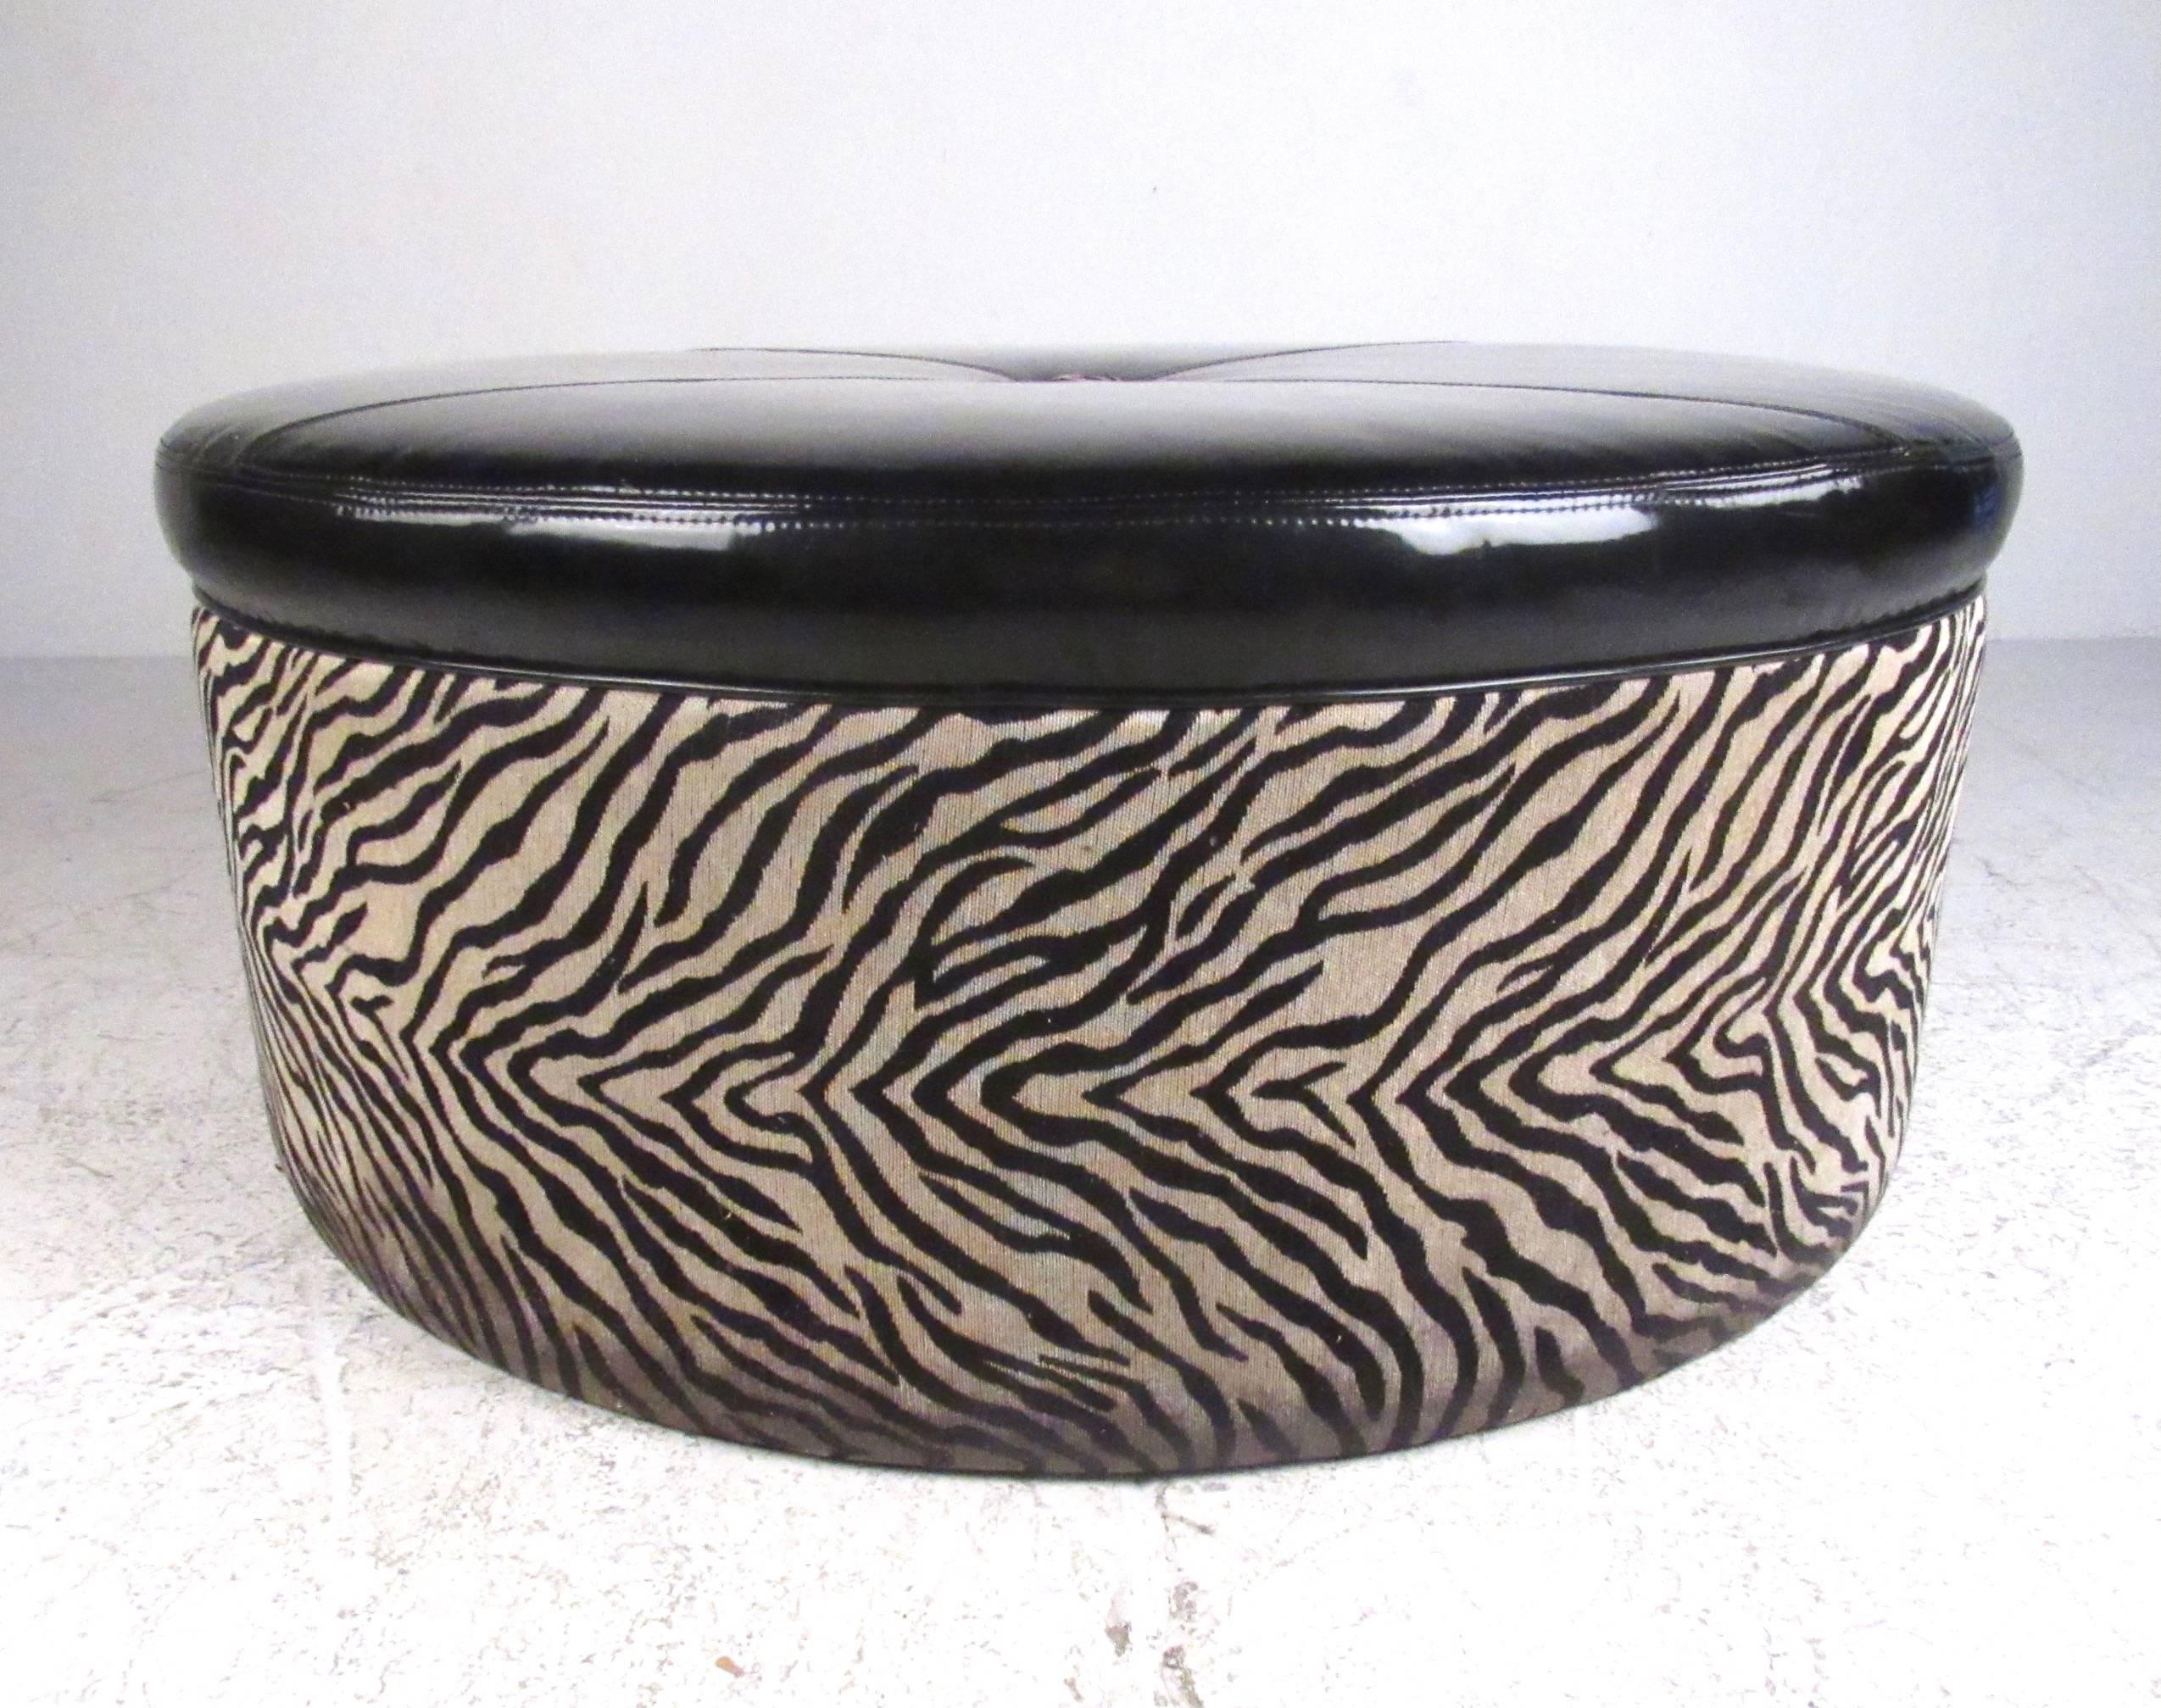 This unique faux animal skin ottoman makes a unique modern addition to any seating arrangement, offering a comfortable occasional seat or circular center piece. Faux skin print and stylish two tone upholstery make this an impressive addition to any